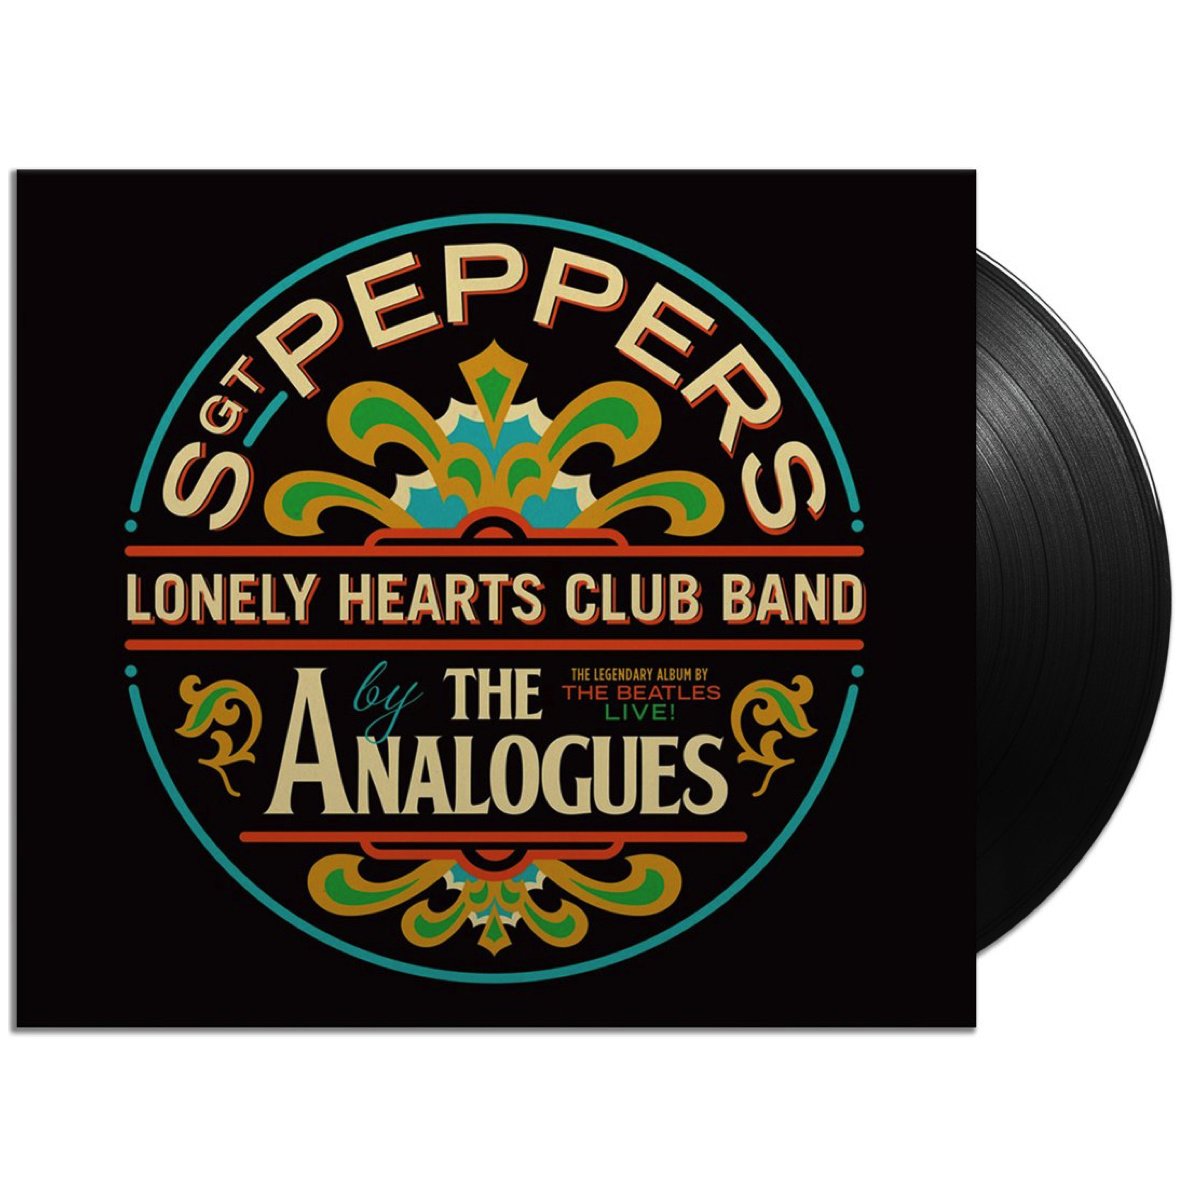   Bewerken The Analogues | LP - Sgt. Pepper's Lonely Hearts Club Band Live